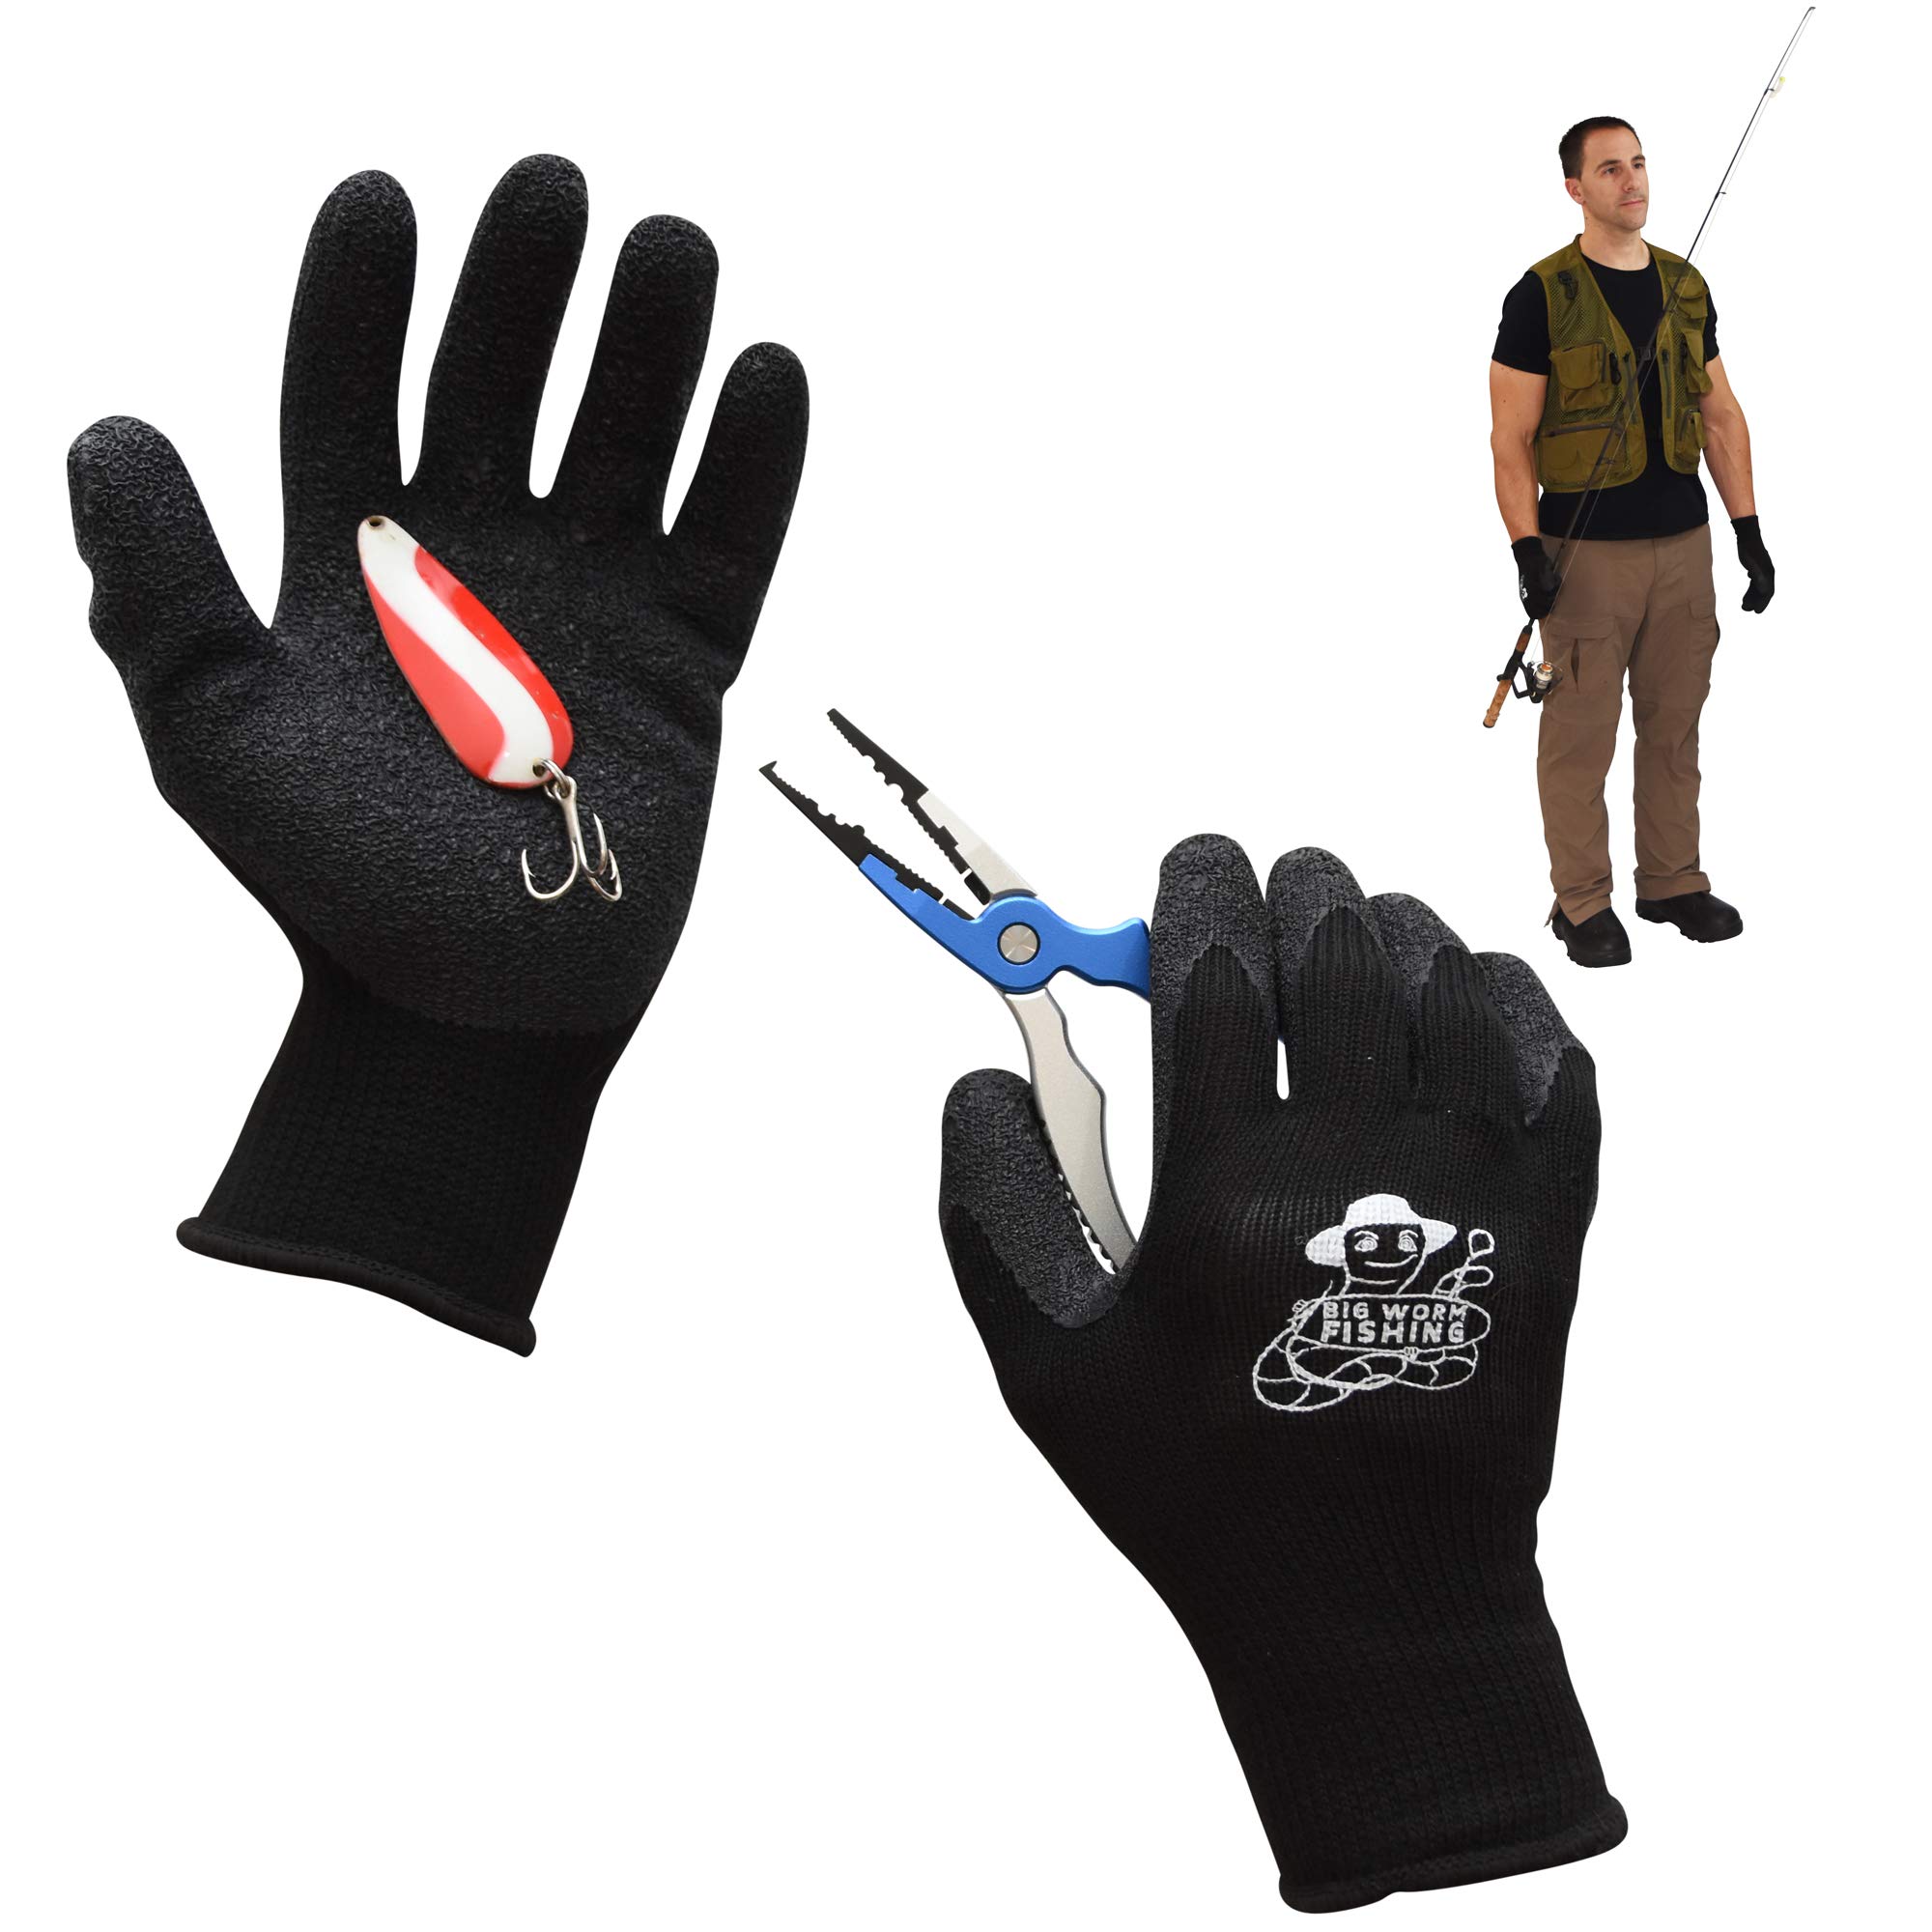 Big Worm Fishing Fish Handling/Cleaning Gloves Textured Grip